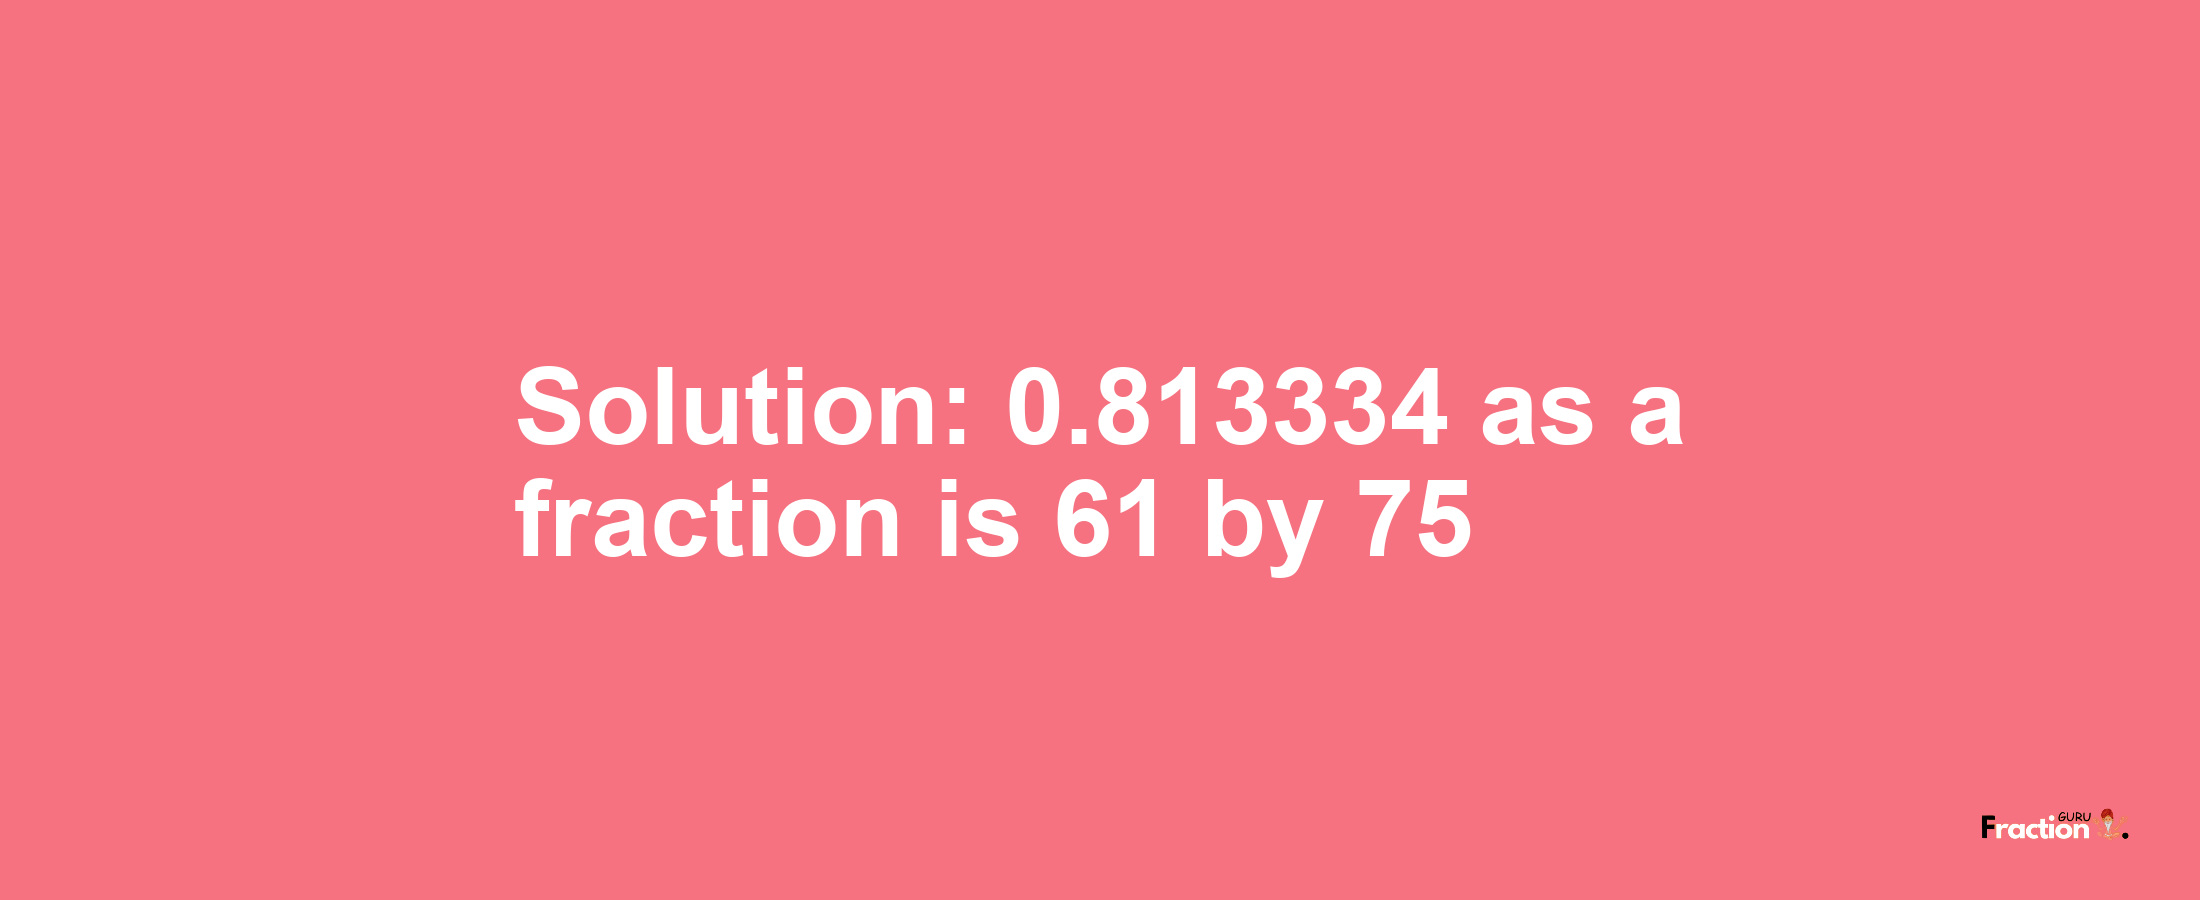 Solution:0.813334 as a fraction is 61/75